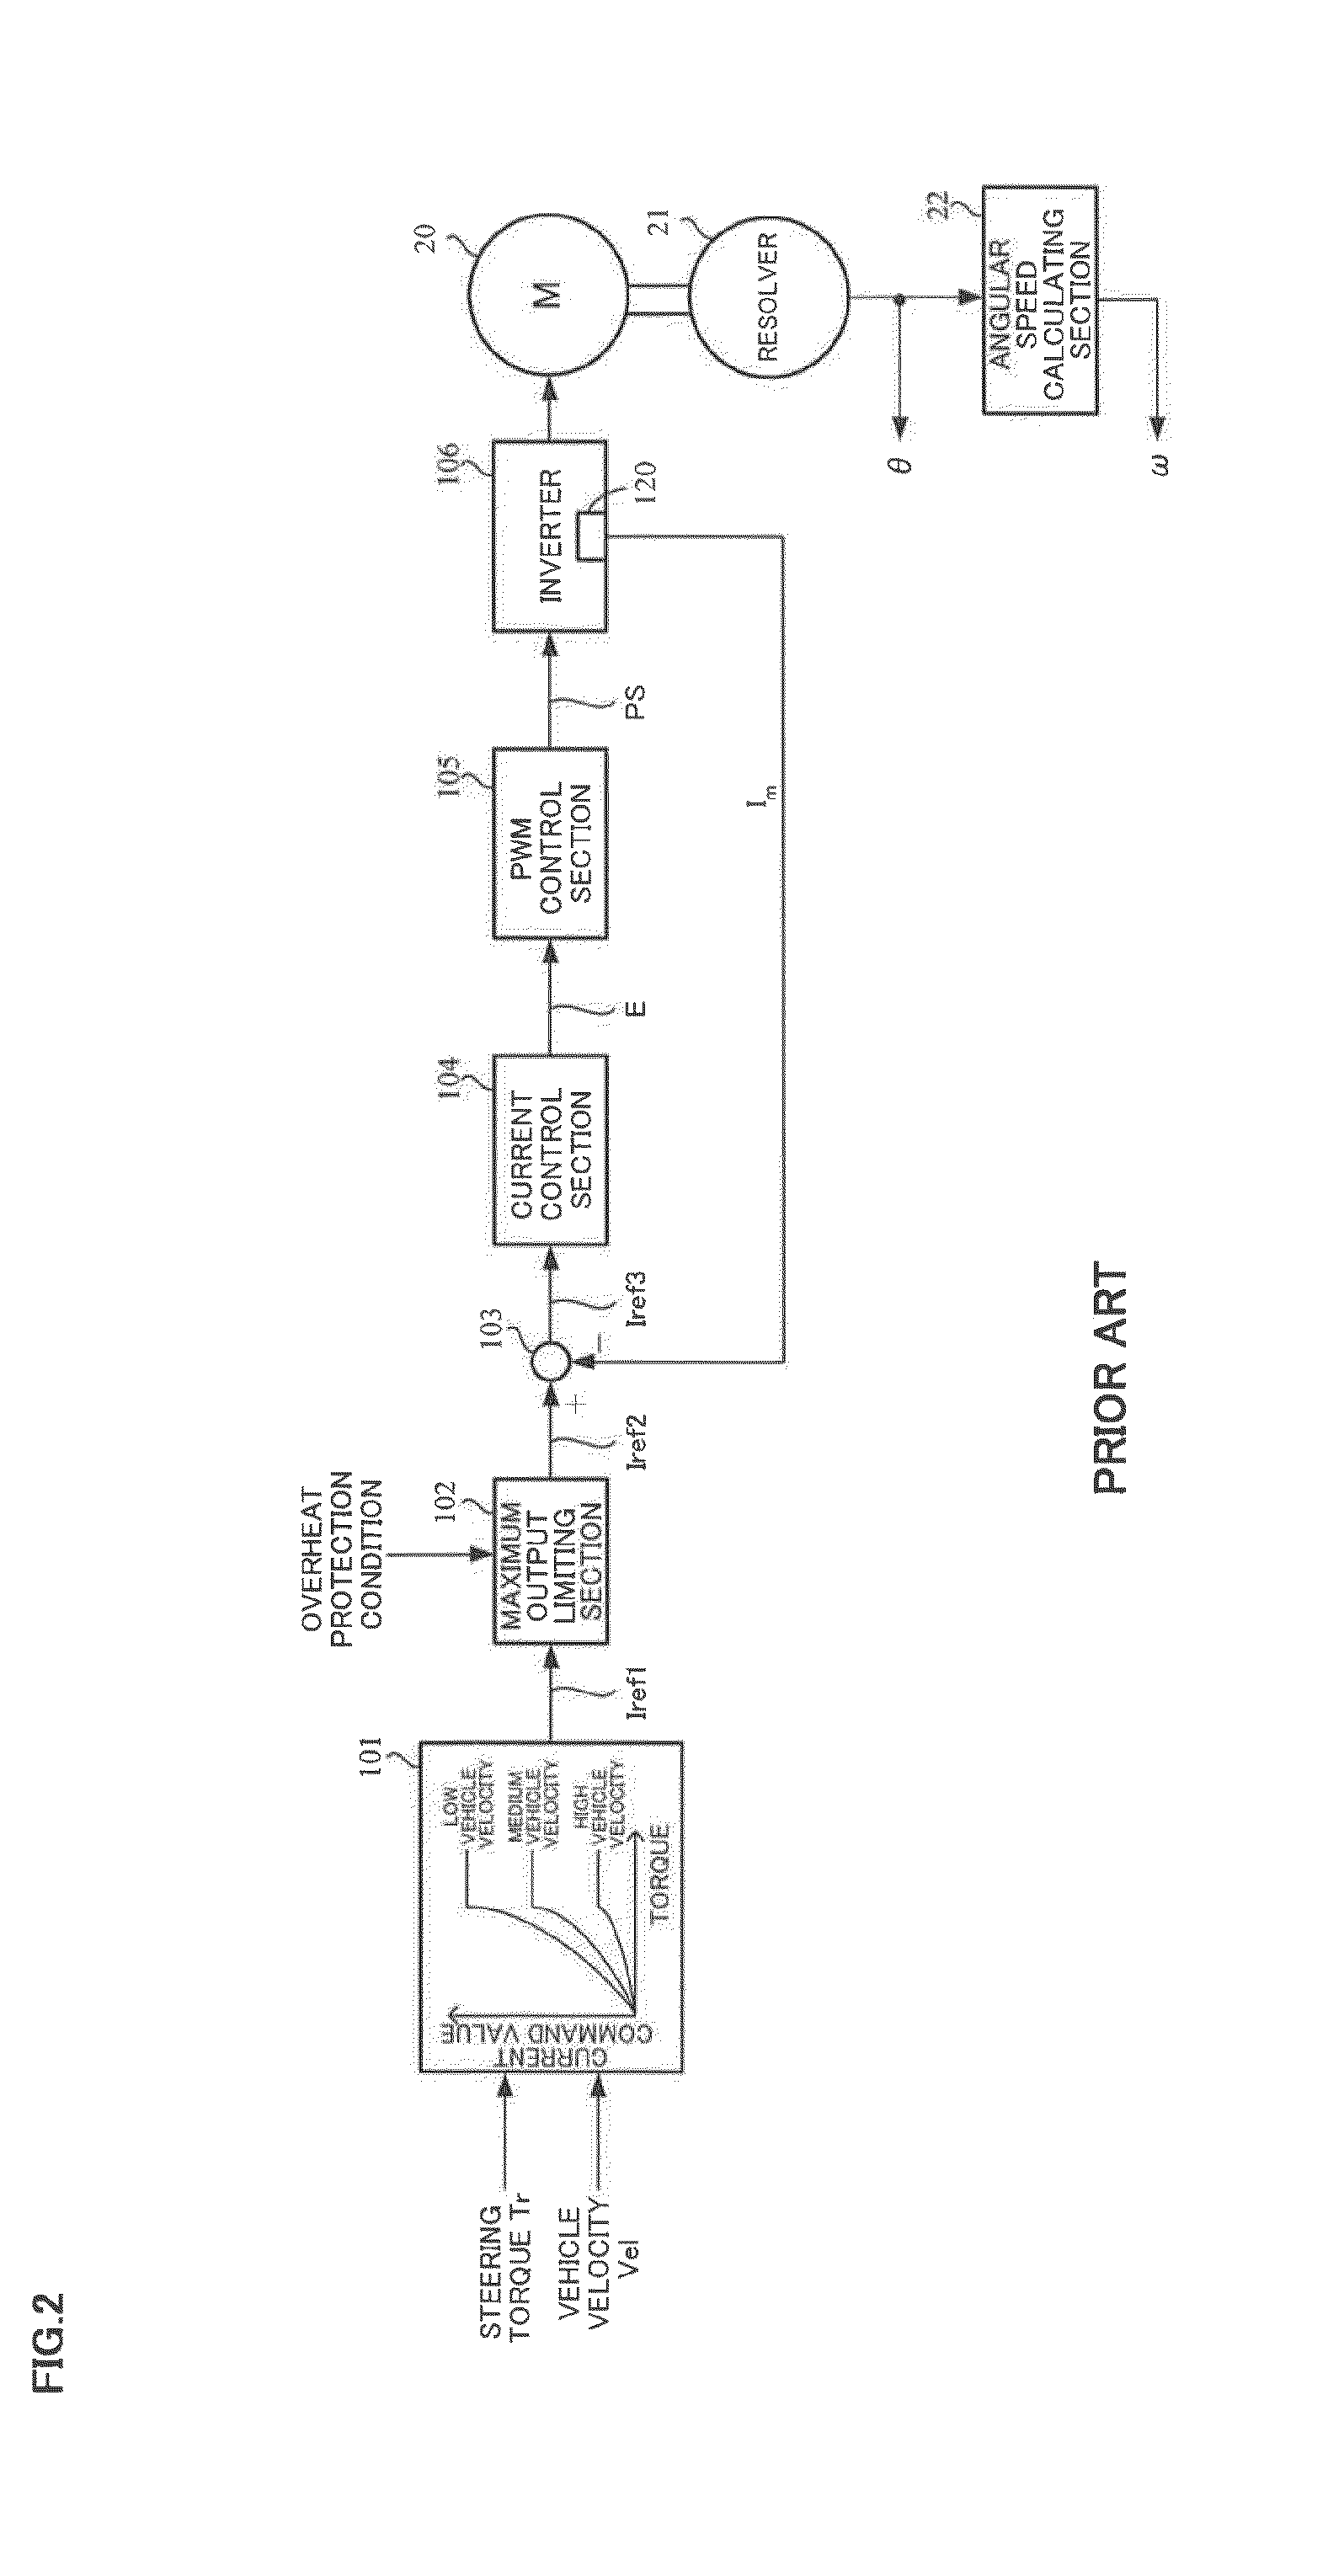 Multi-phase motor control apparatus and electric power steering apparatus using the same